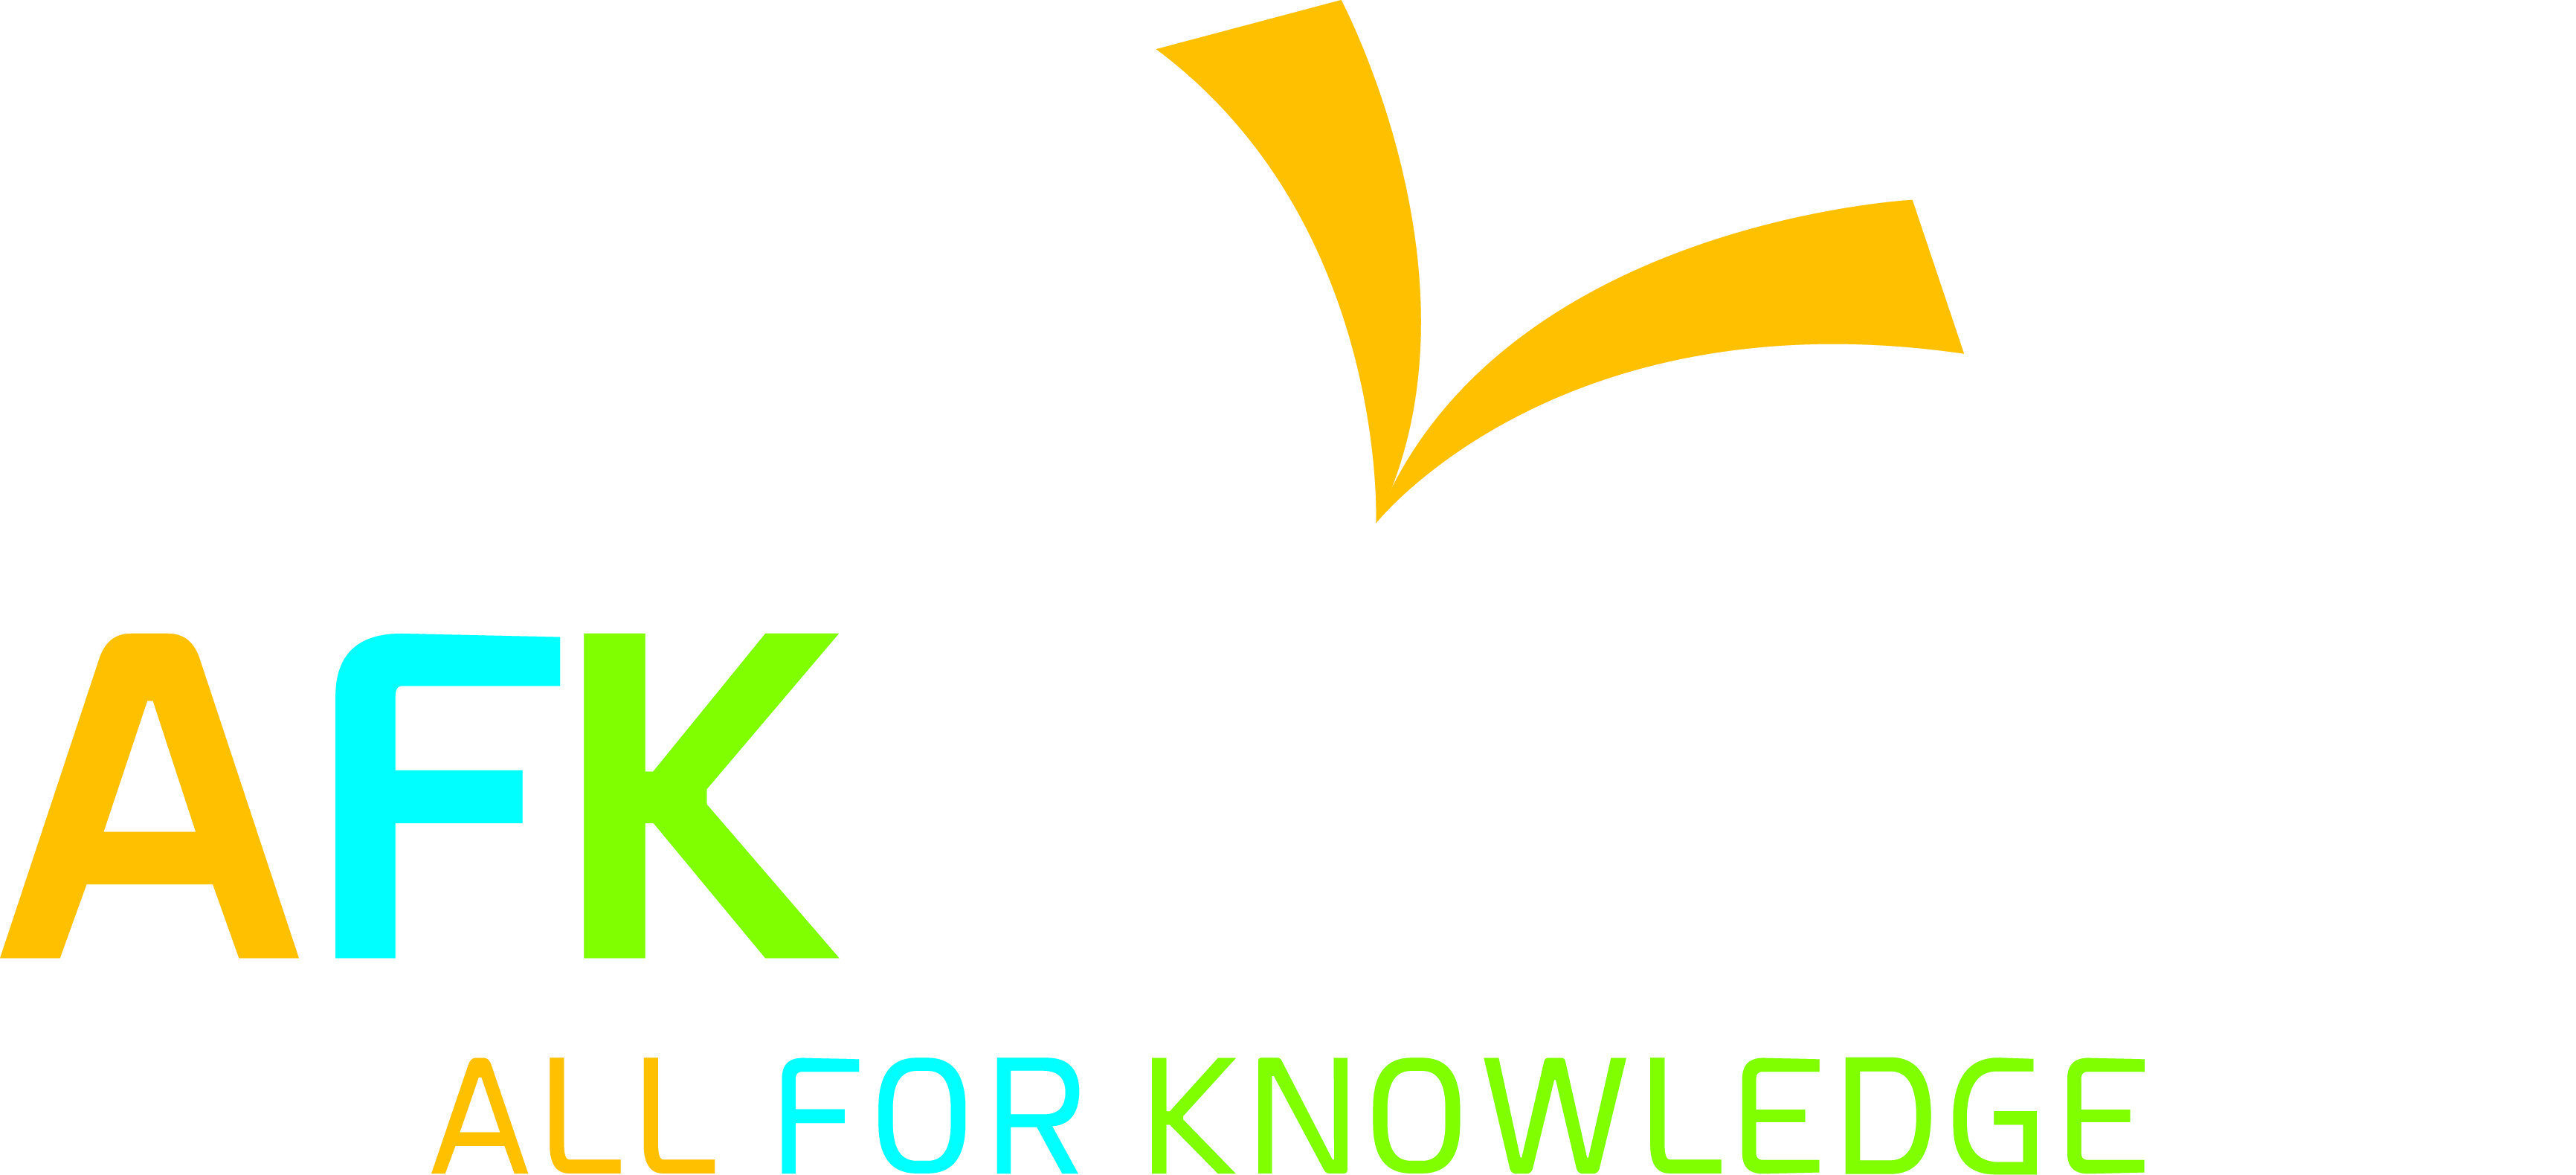 AfkForums - All for Knowledge